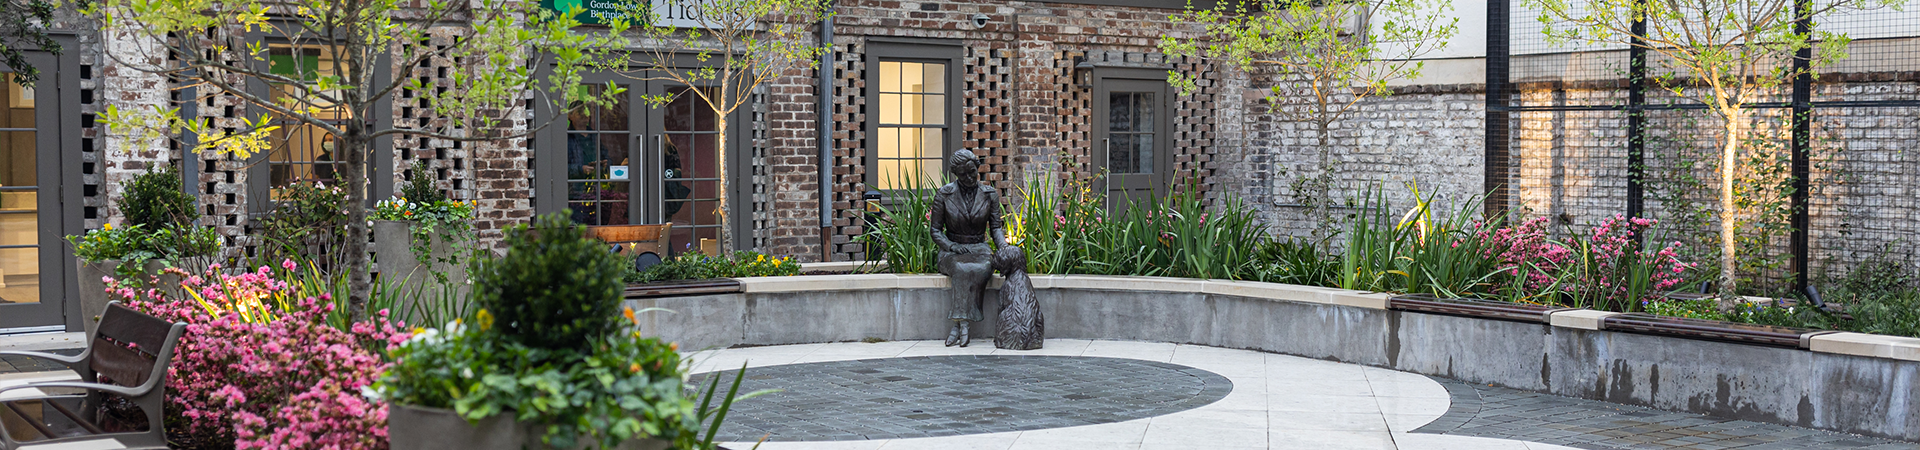  garden of the birthplace with juliette gordon low statue 